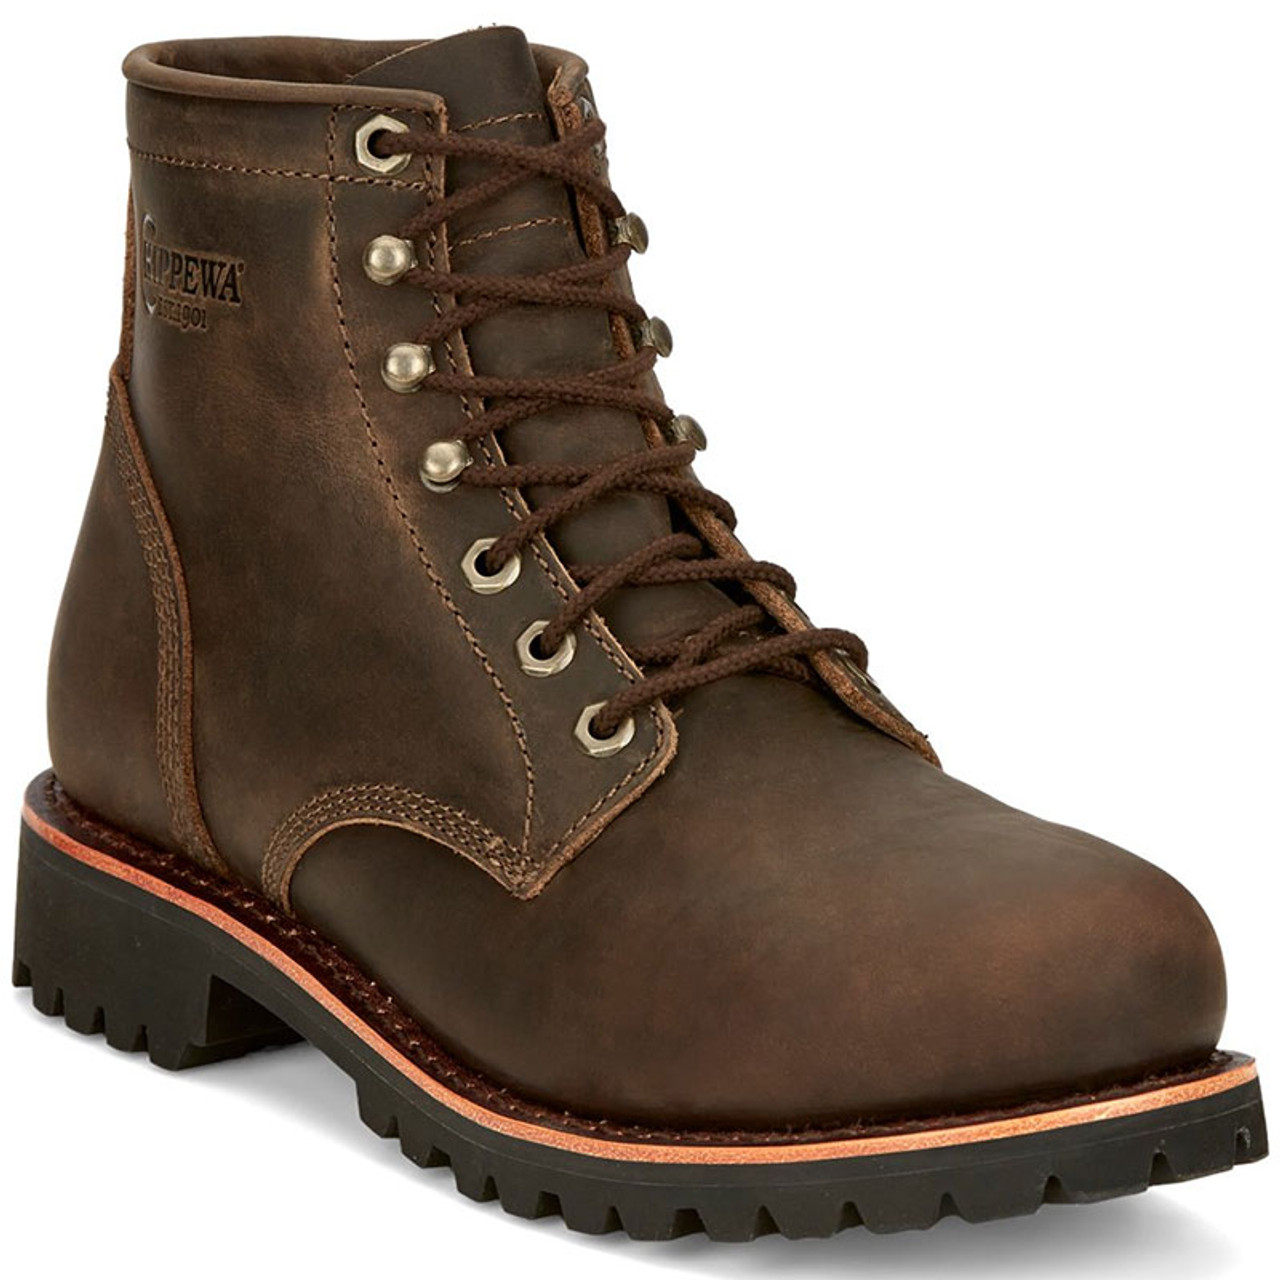 Chippewa Boots -Your Work Boot Headquarters